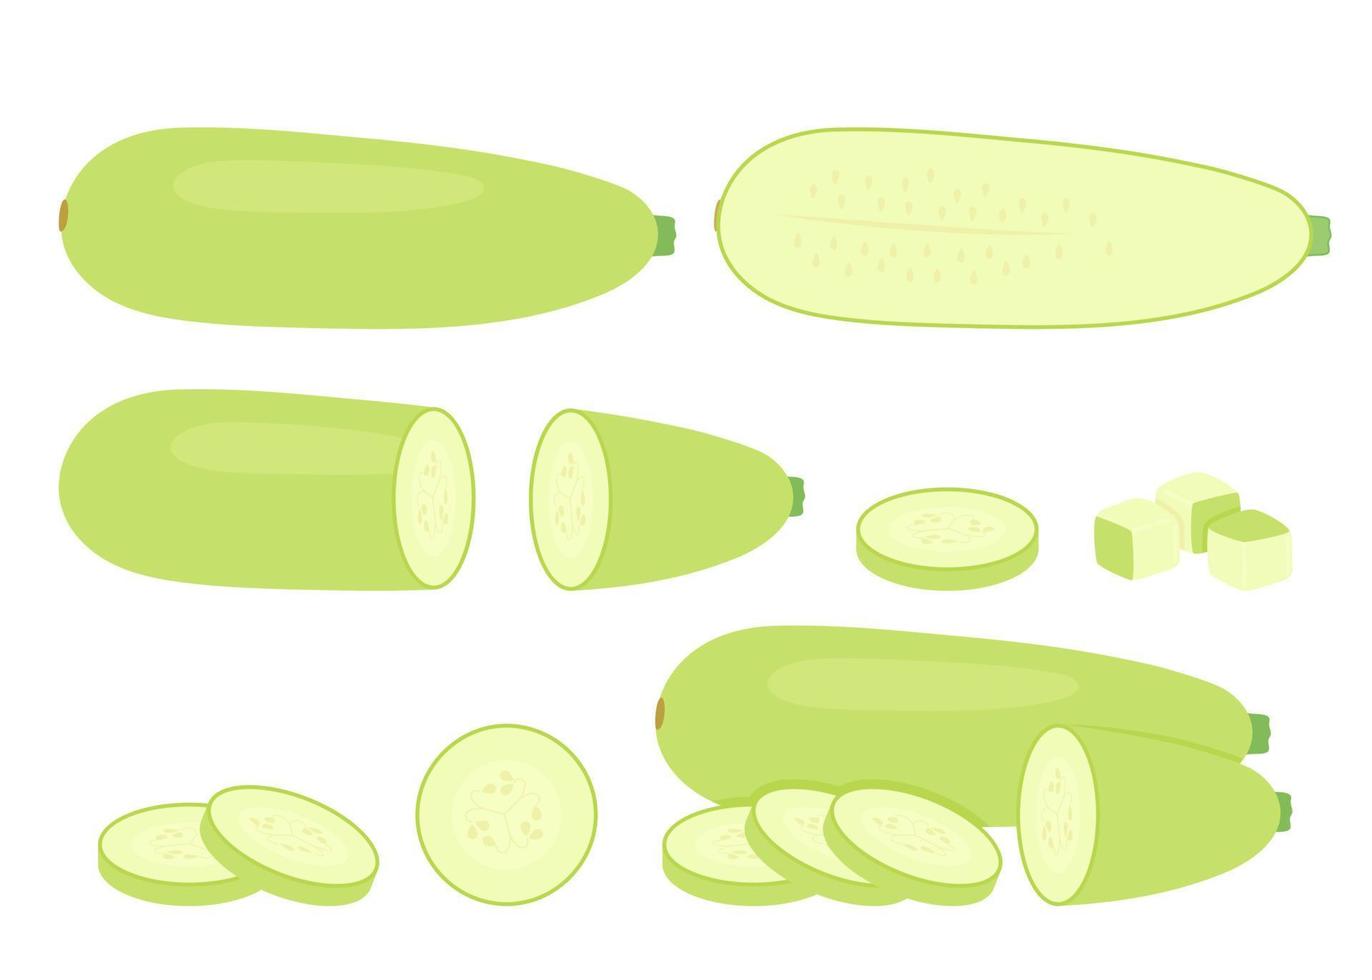 Green zucchini food set, whole and chopped squash. Courgette whole, cut half and sliced. Crop edible plant vegetable. Vector isolated illustration